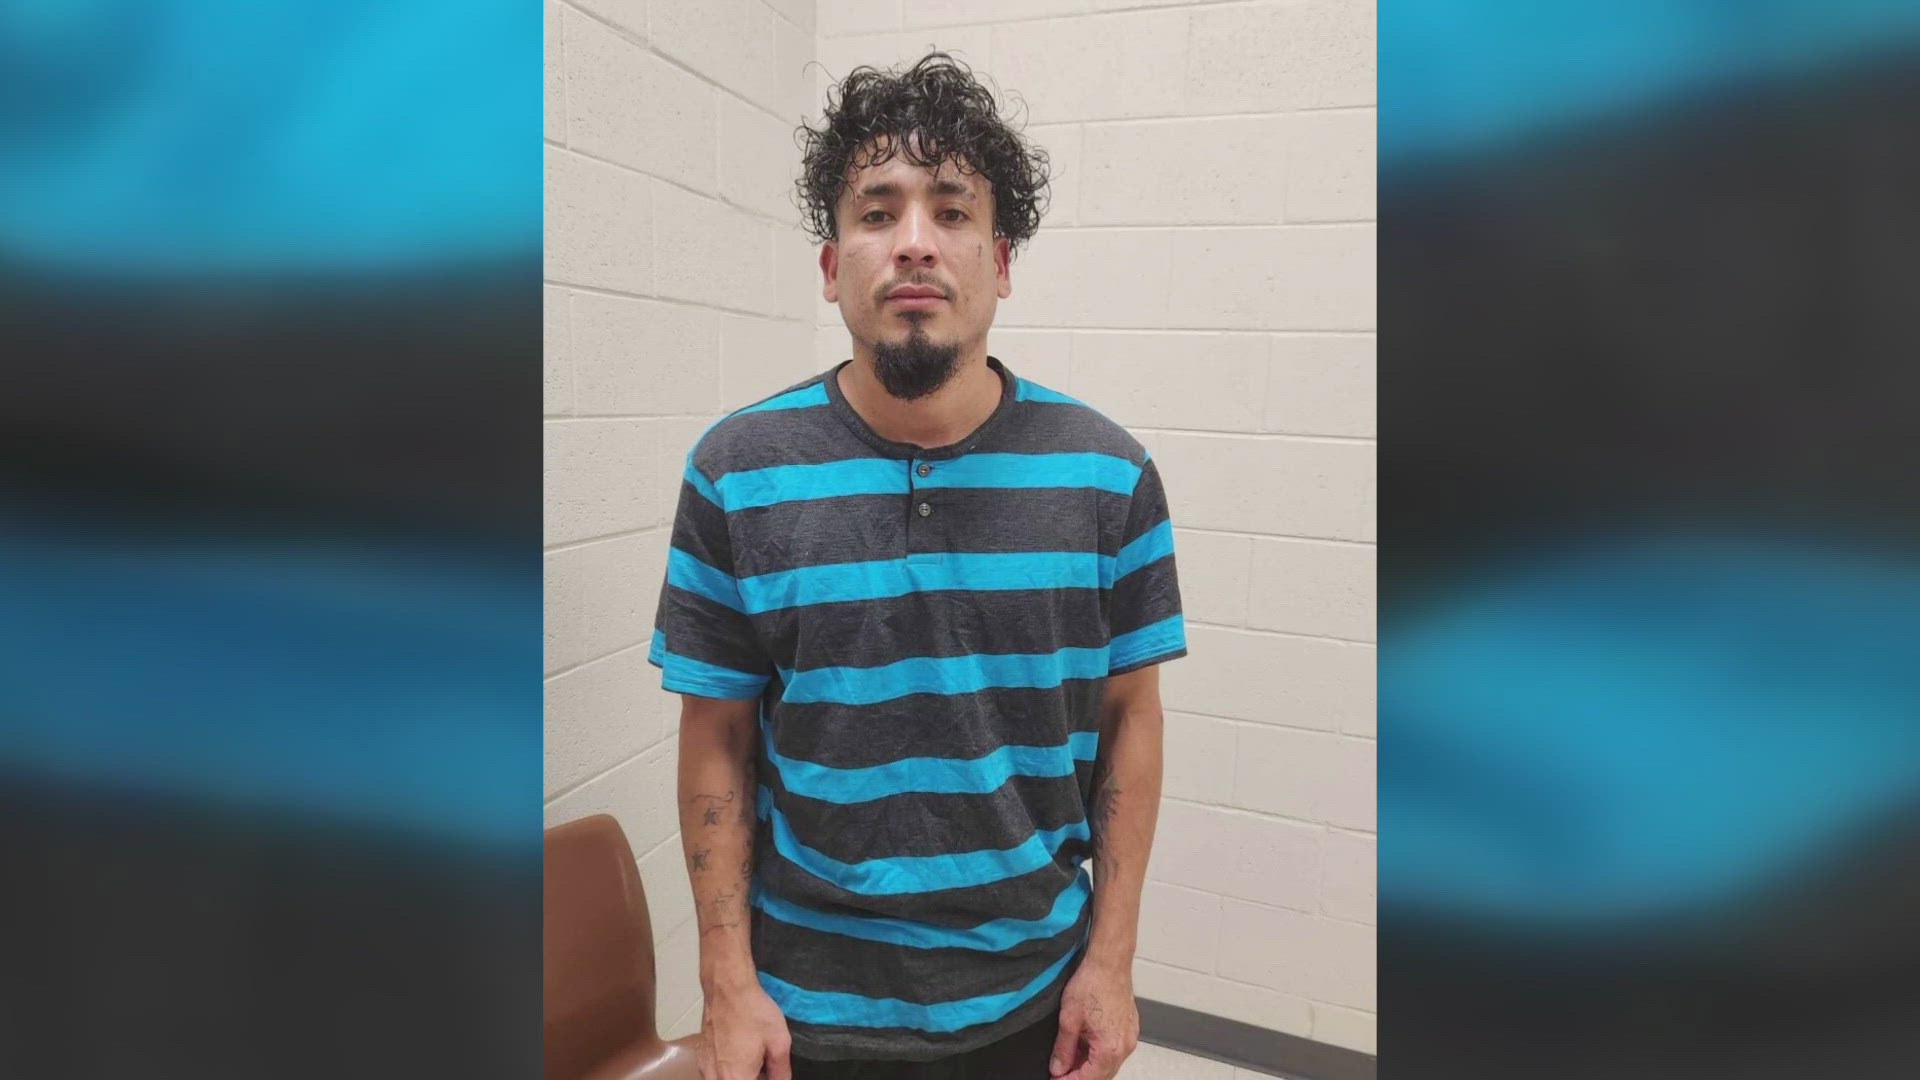 A man suspected of some domestic battery is being sought after cutting off his ankle monitor and tossing it into the marsh.